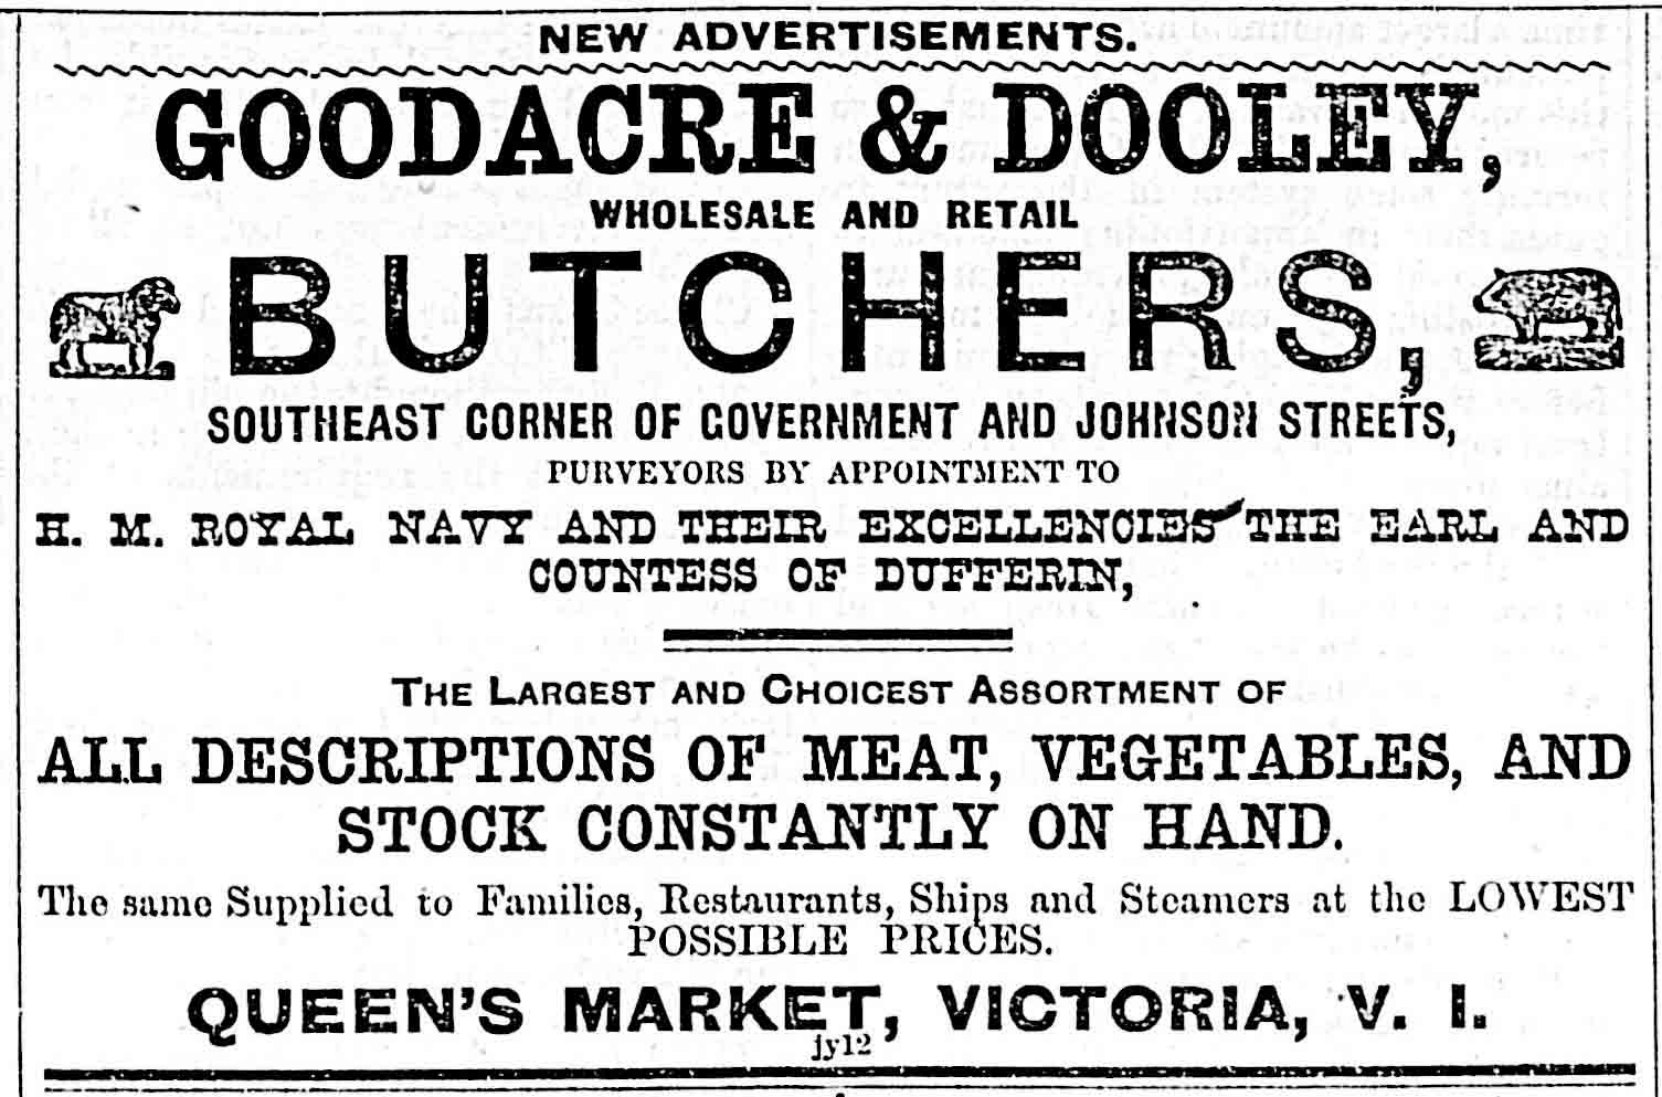 1879 advertisement for Goodacre & Dooley Butchers, located where 1327-1327 Government Street stands now.